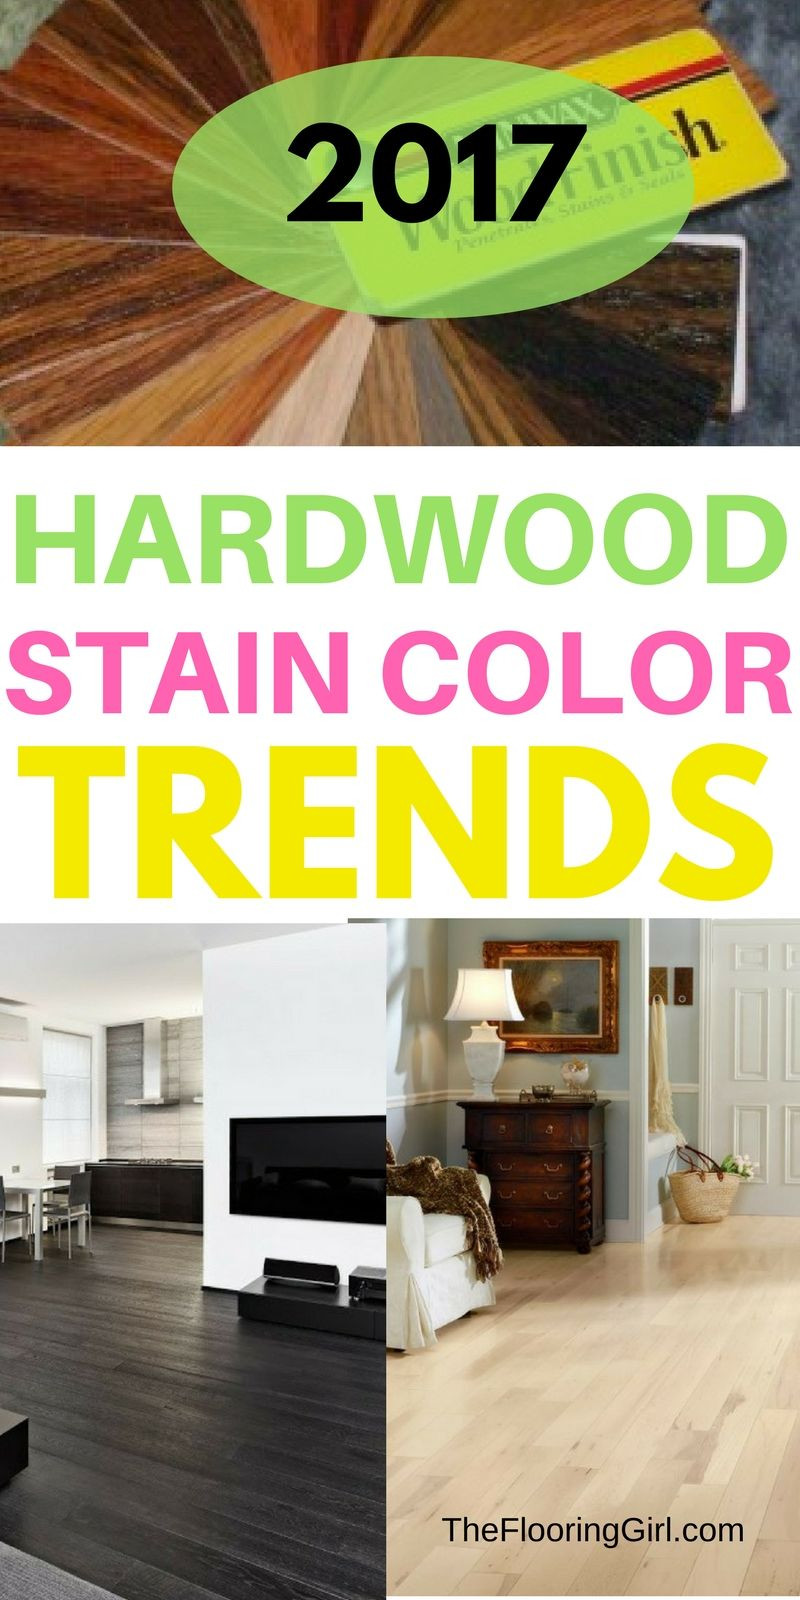 10 Recommended Hardwood Floor Stain Options 2024 free download hardwood floor stain options of hardwood flooring stain color trends 2018 more from the flooring for hardwood flooring stain color trends for 2017 hardwood colors that are in style thefloori